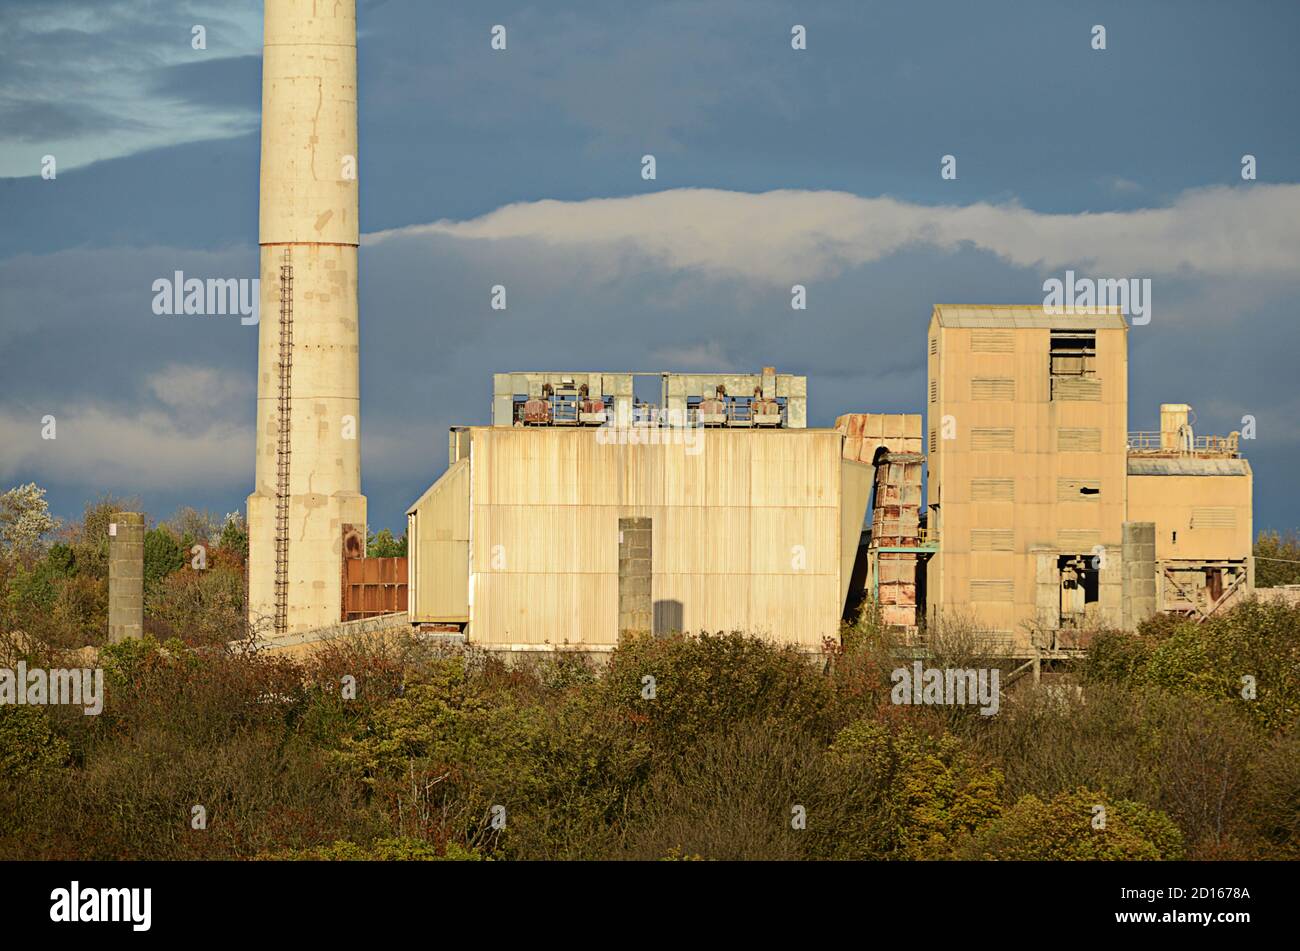 Quarry building in Ferryhill in County Durham. The chimney stack is a local landmark. The site of significant importance for dolomite mining. Stock Photo